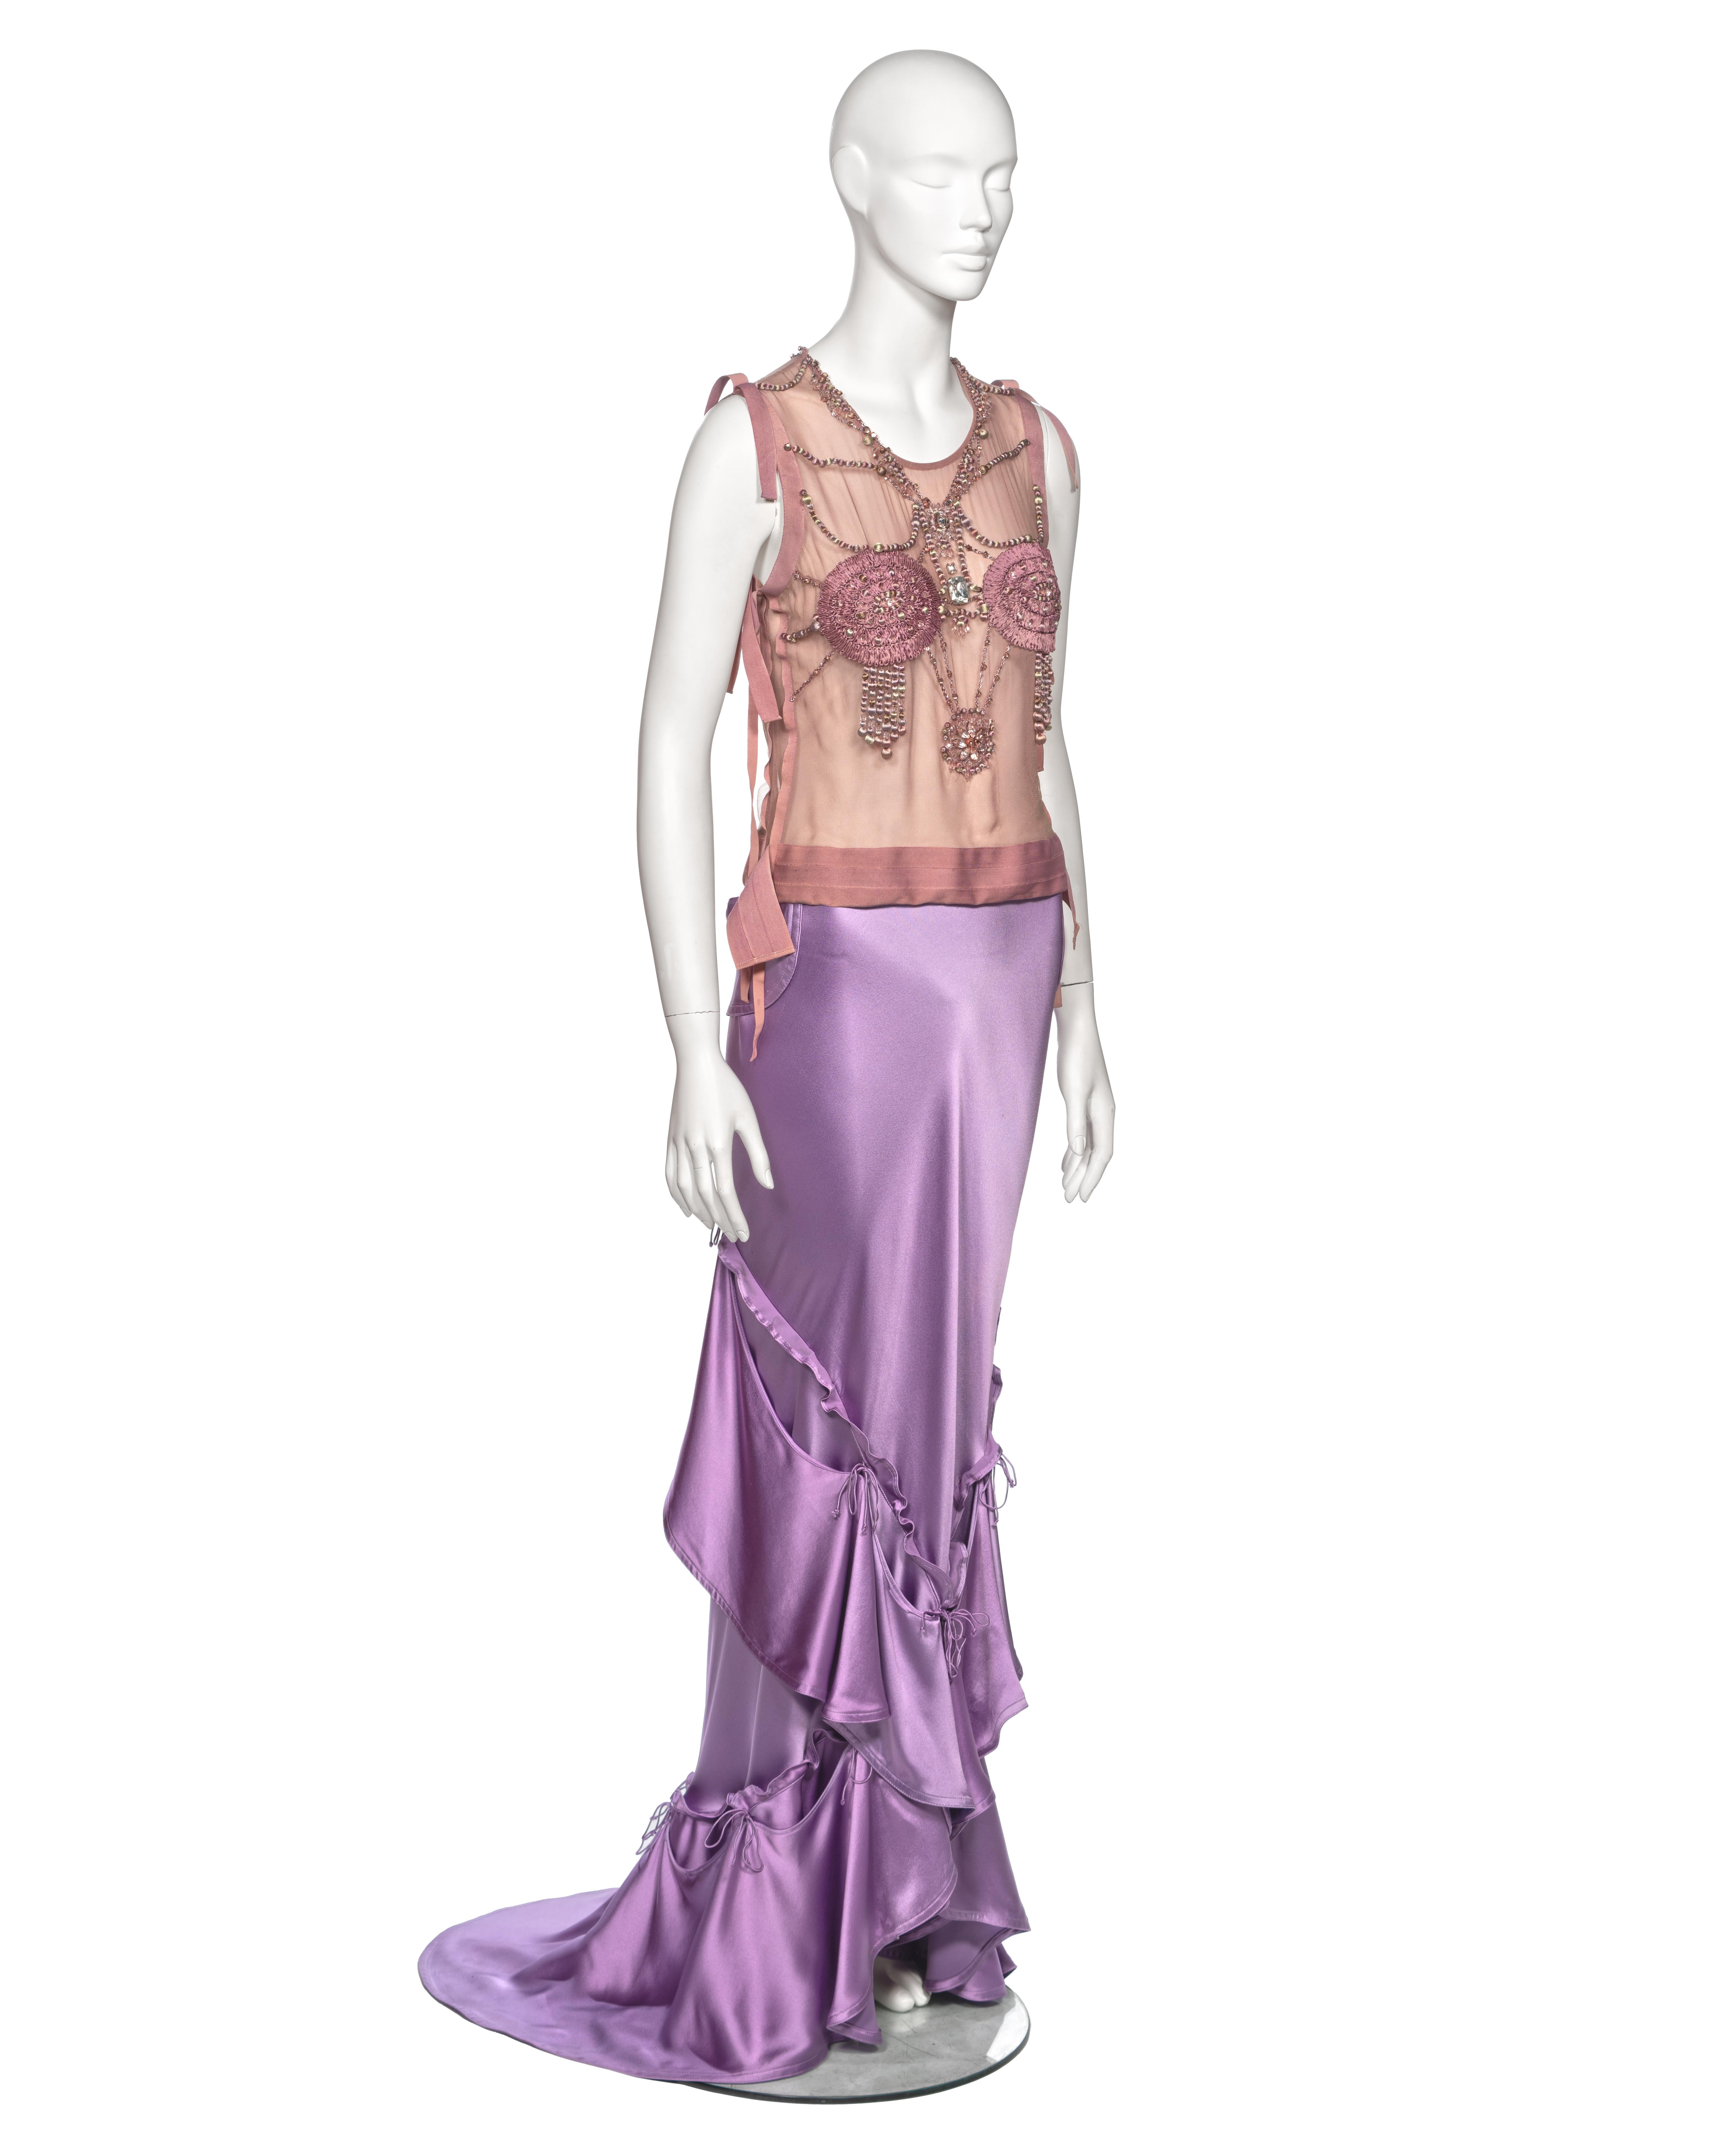 Yves Saint Laurent by Tom Ford Embellished Top and Silk Skirt Ensemble, fw 2003 4